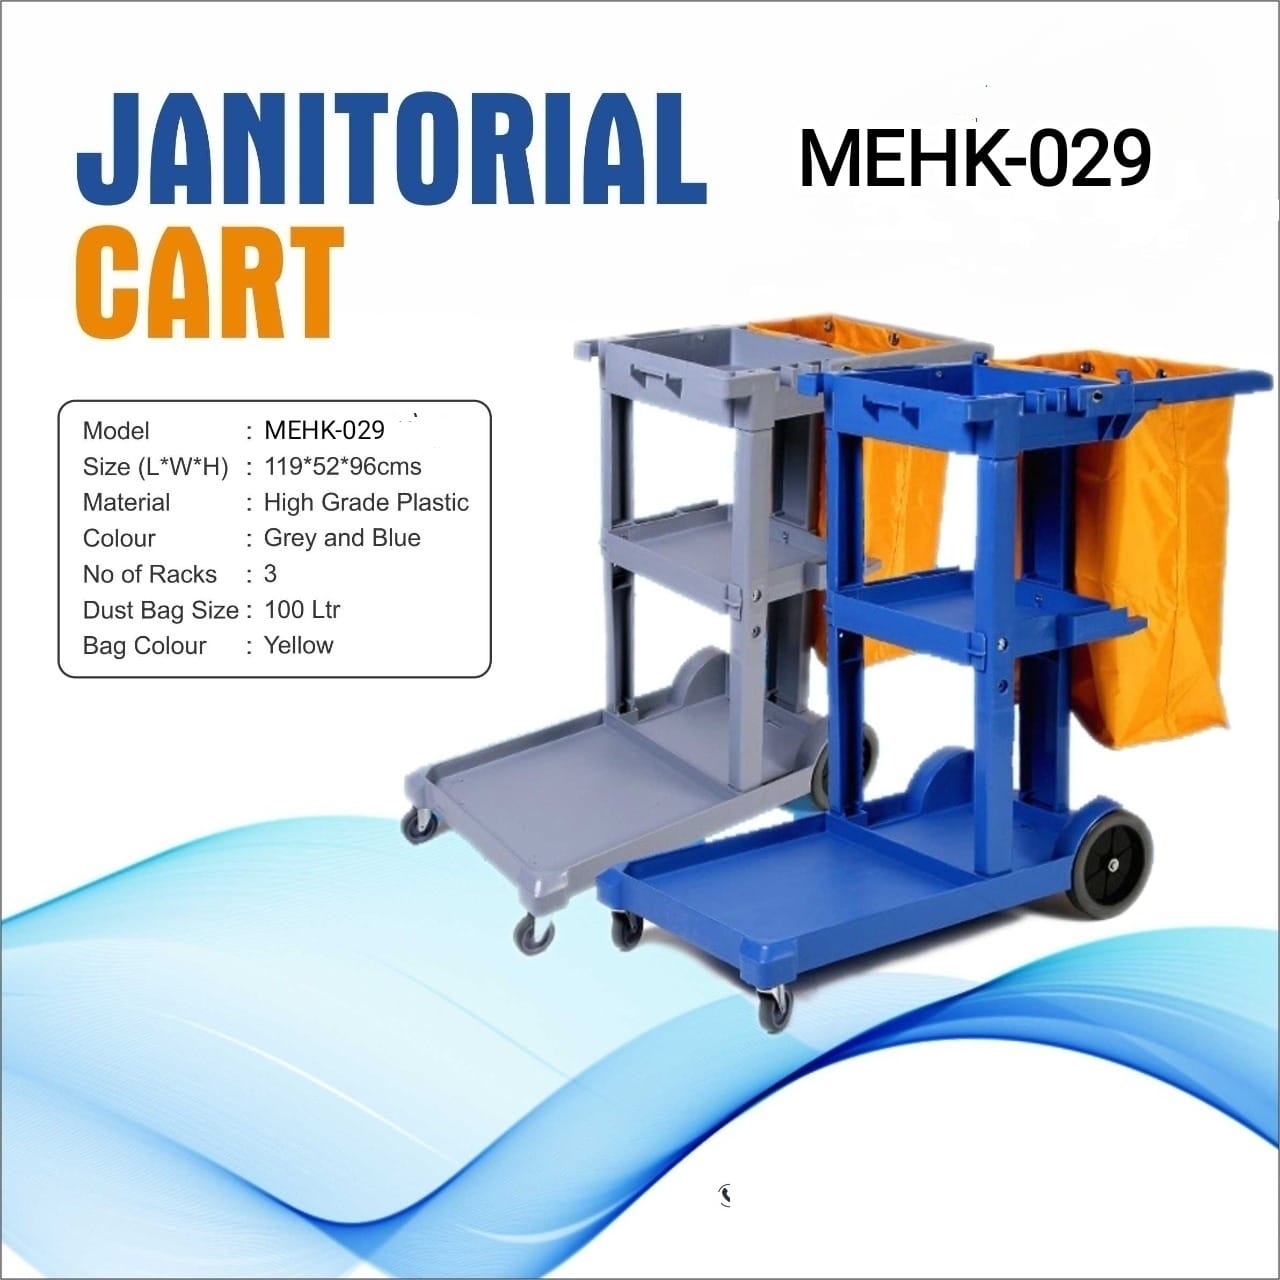 JANITORIAL CART